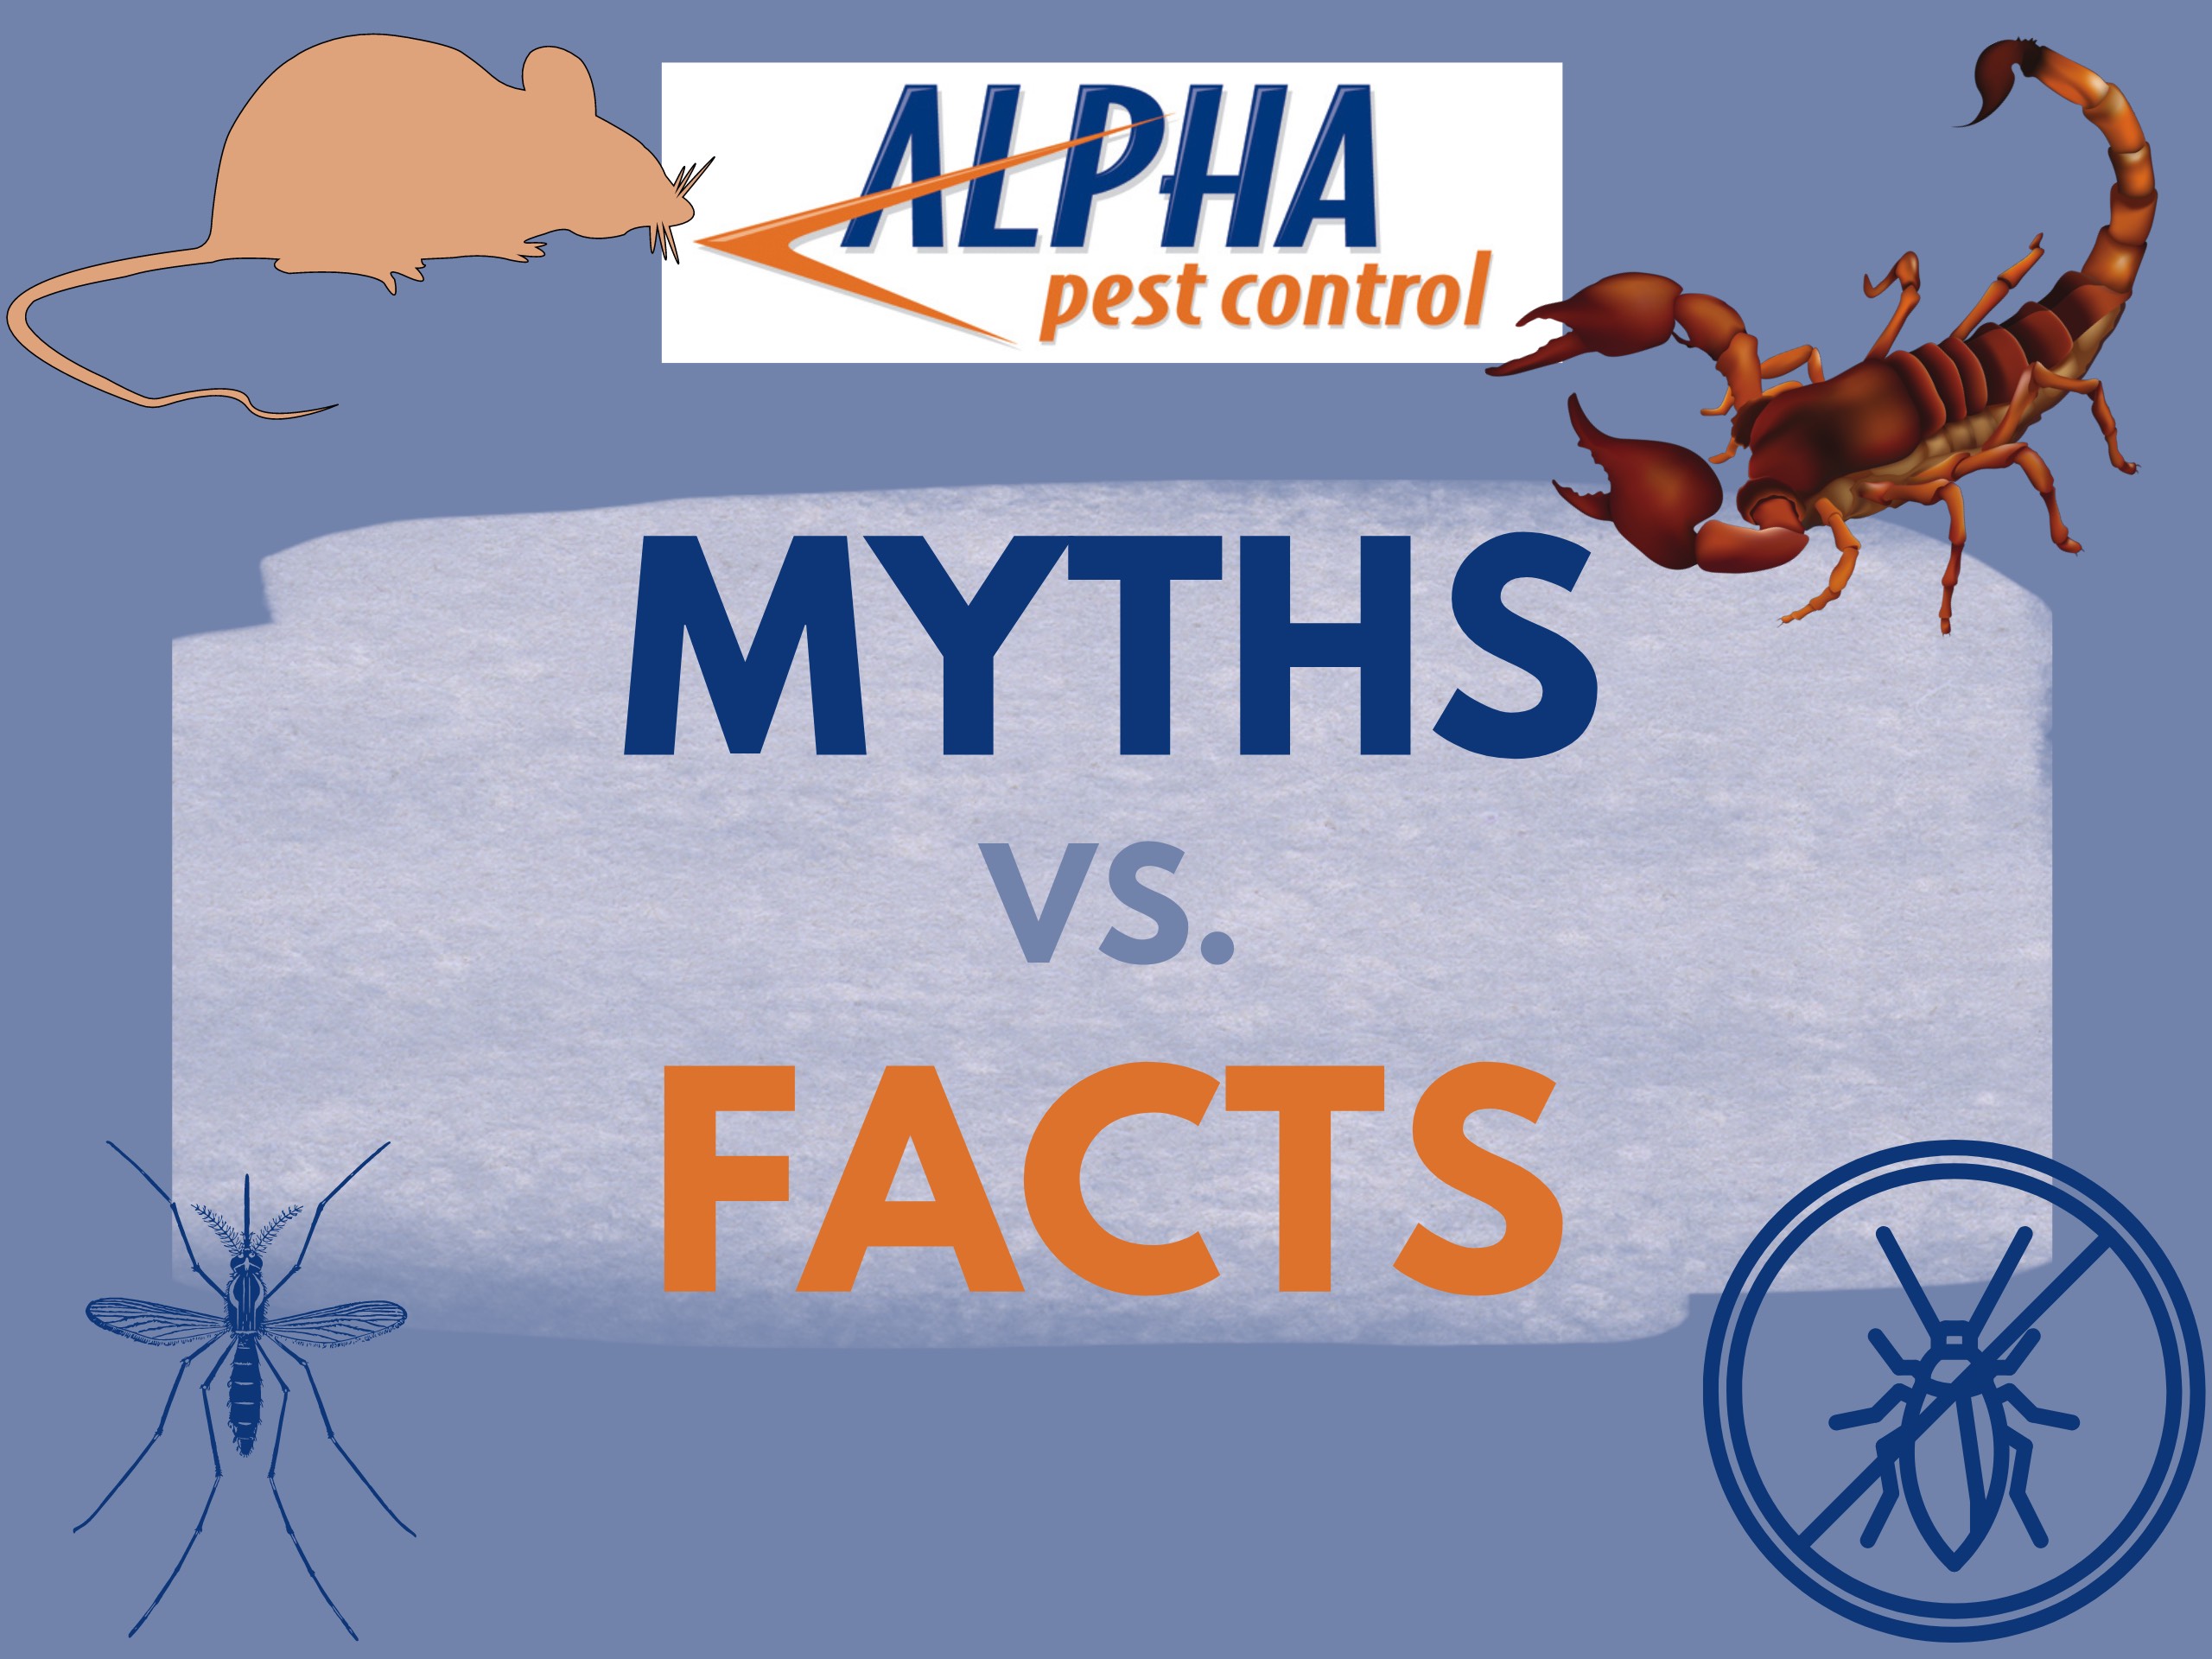 Alpha Pest control myths vs facts scorpion and rodent graphic